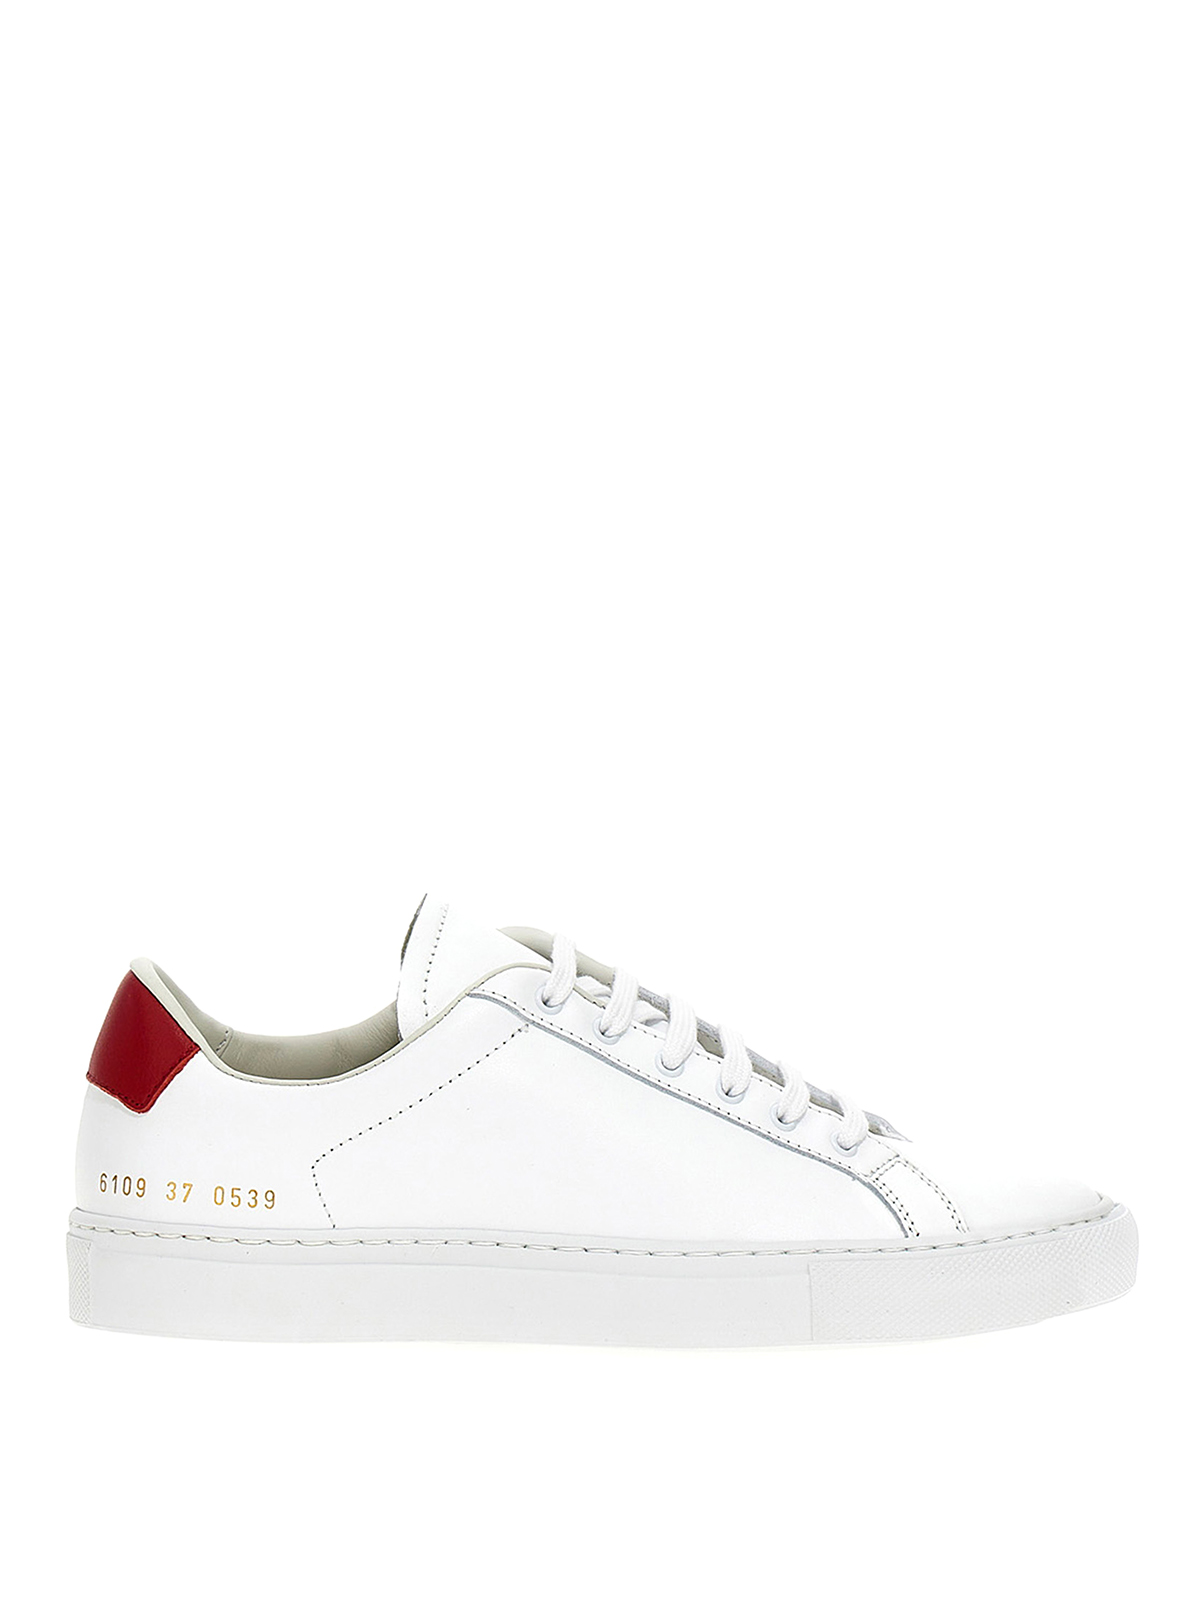 Common Projects Retro Low Sneaker In White